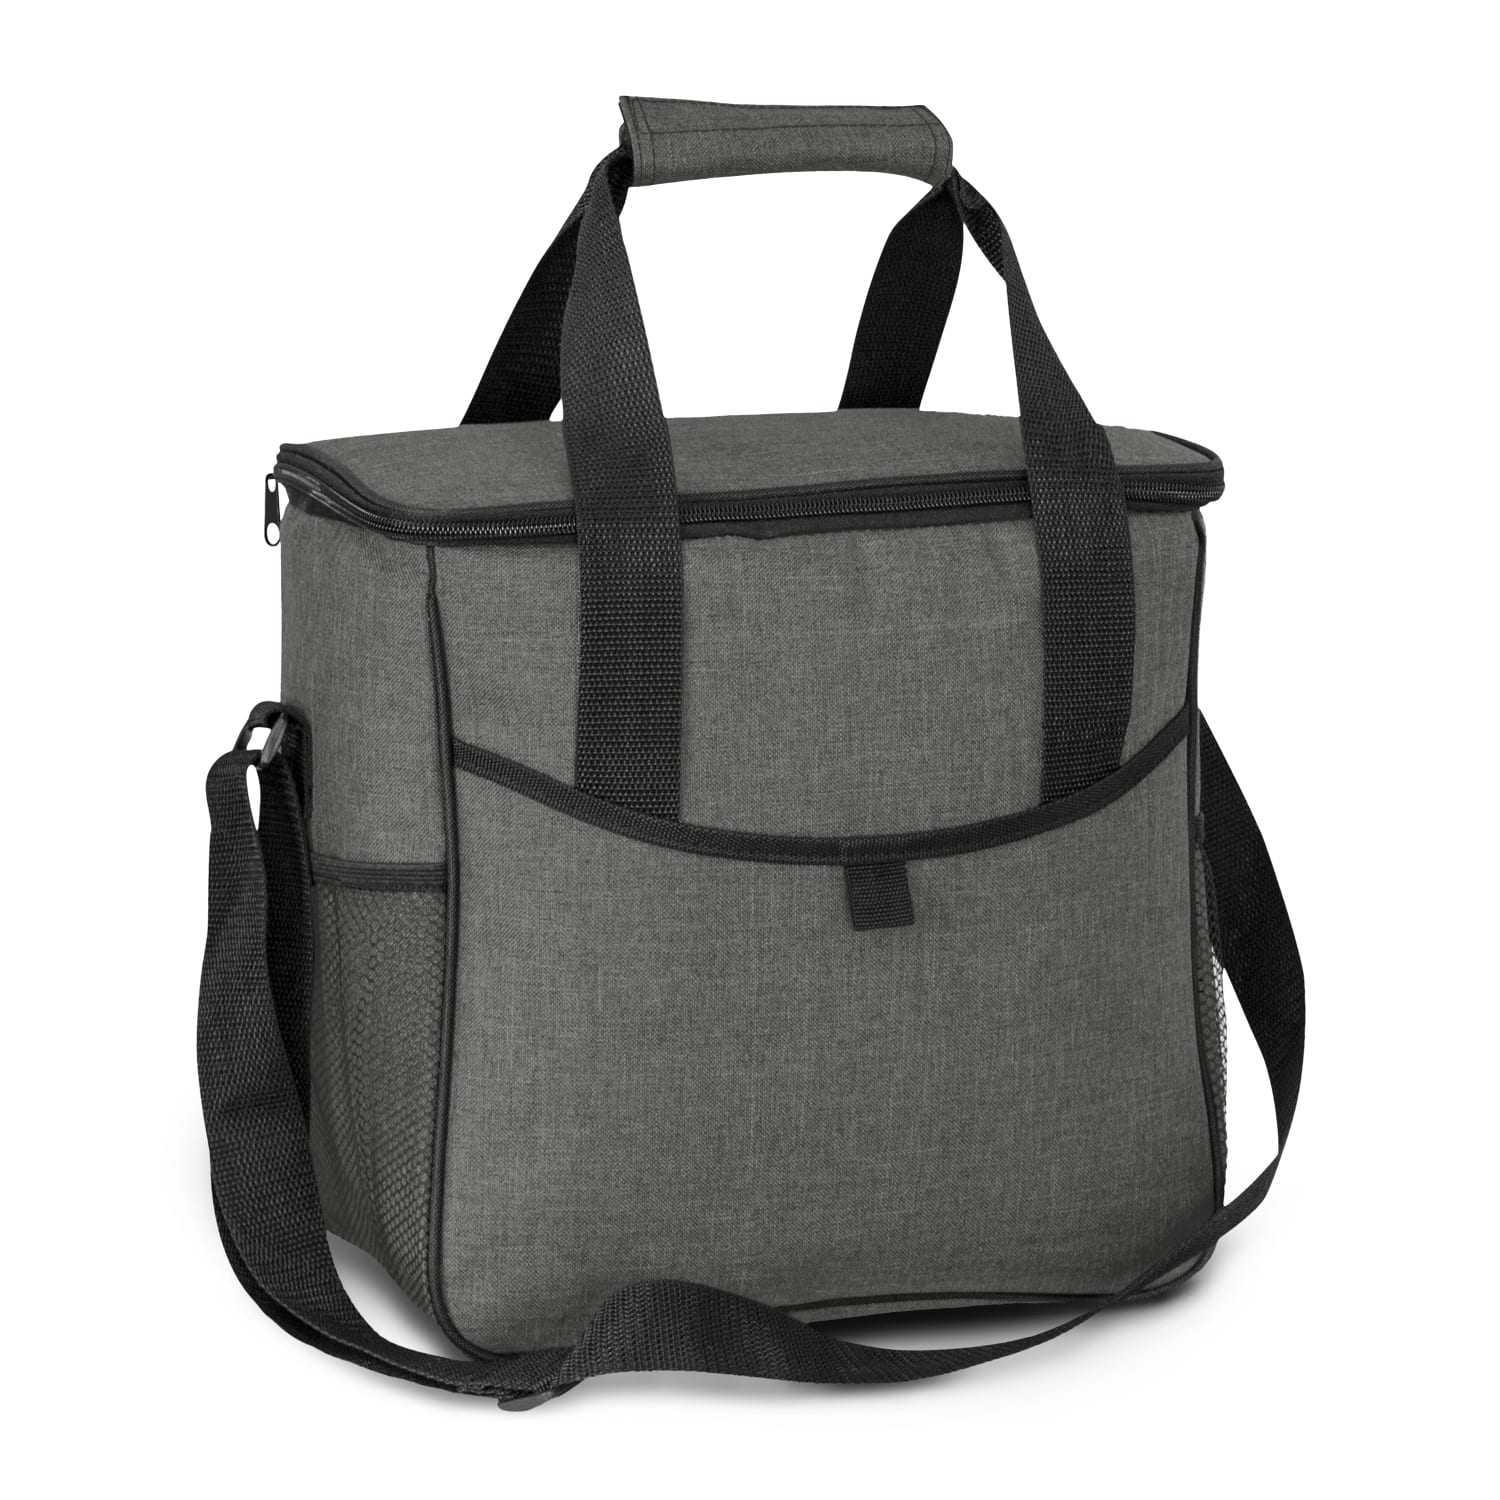 Conference Bags Herald Business Satchel business